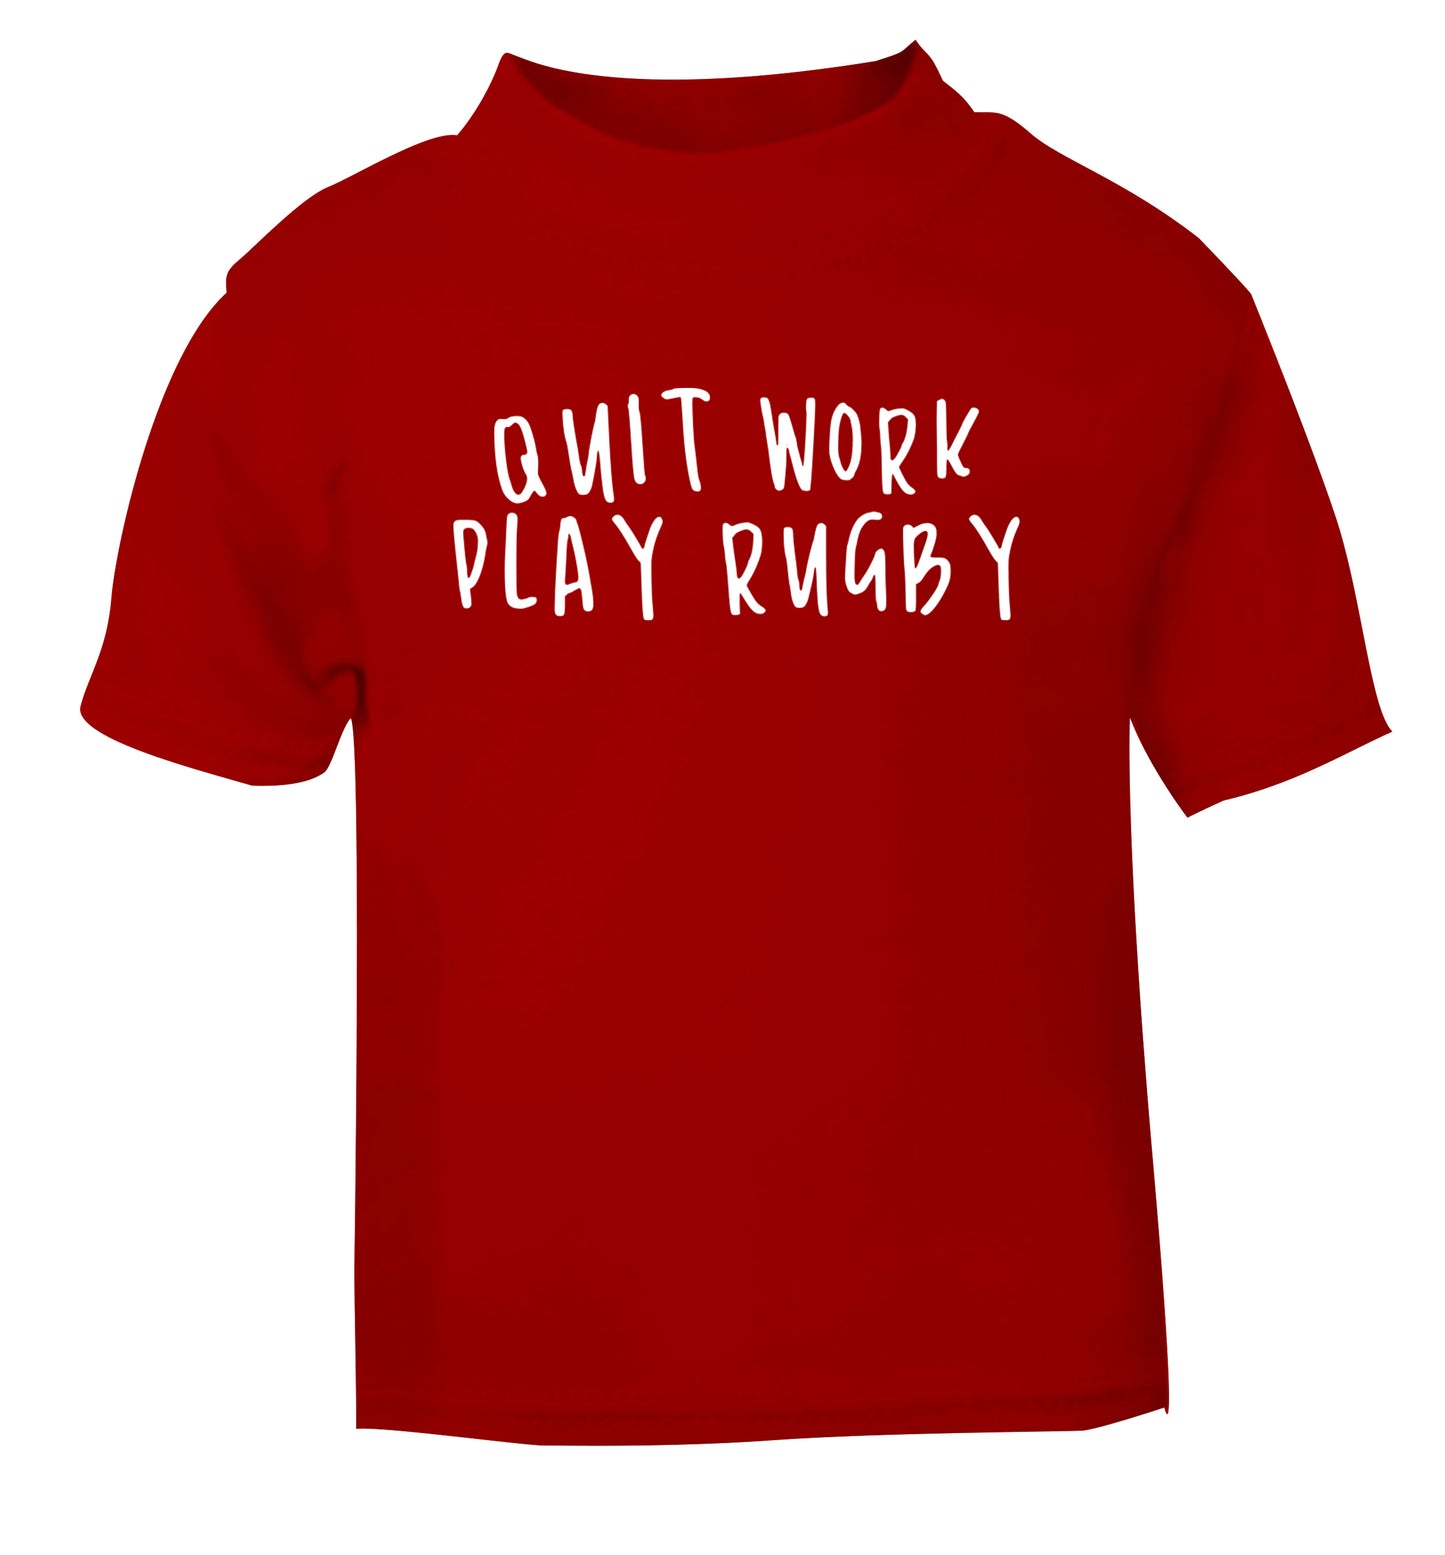 Quit work play rugby red Baby Toddler Tshirt 2 Years